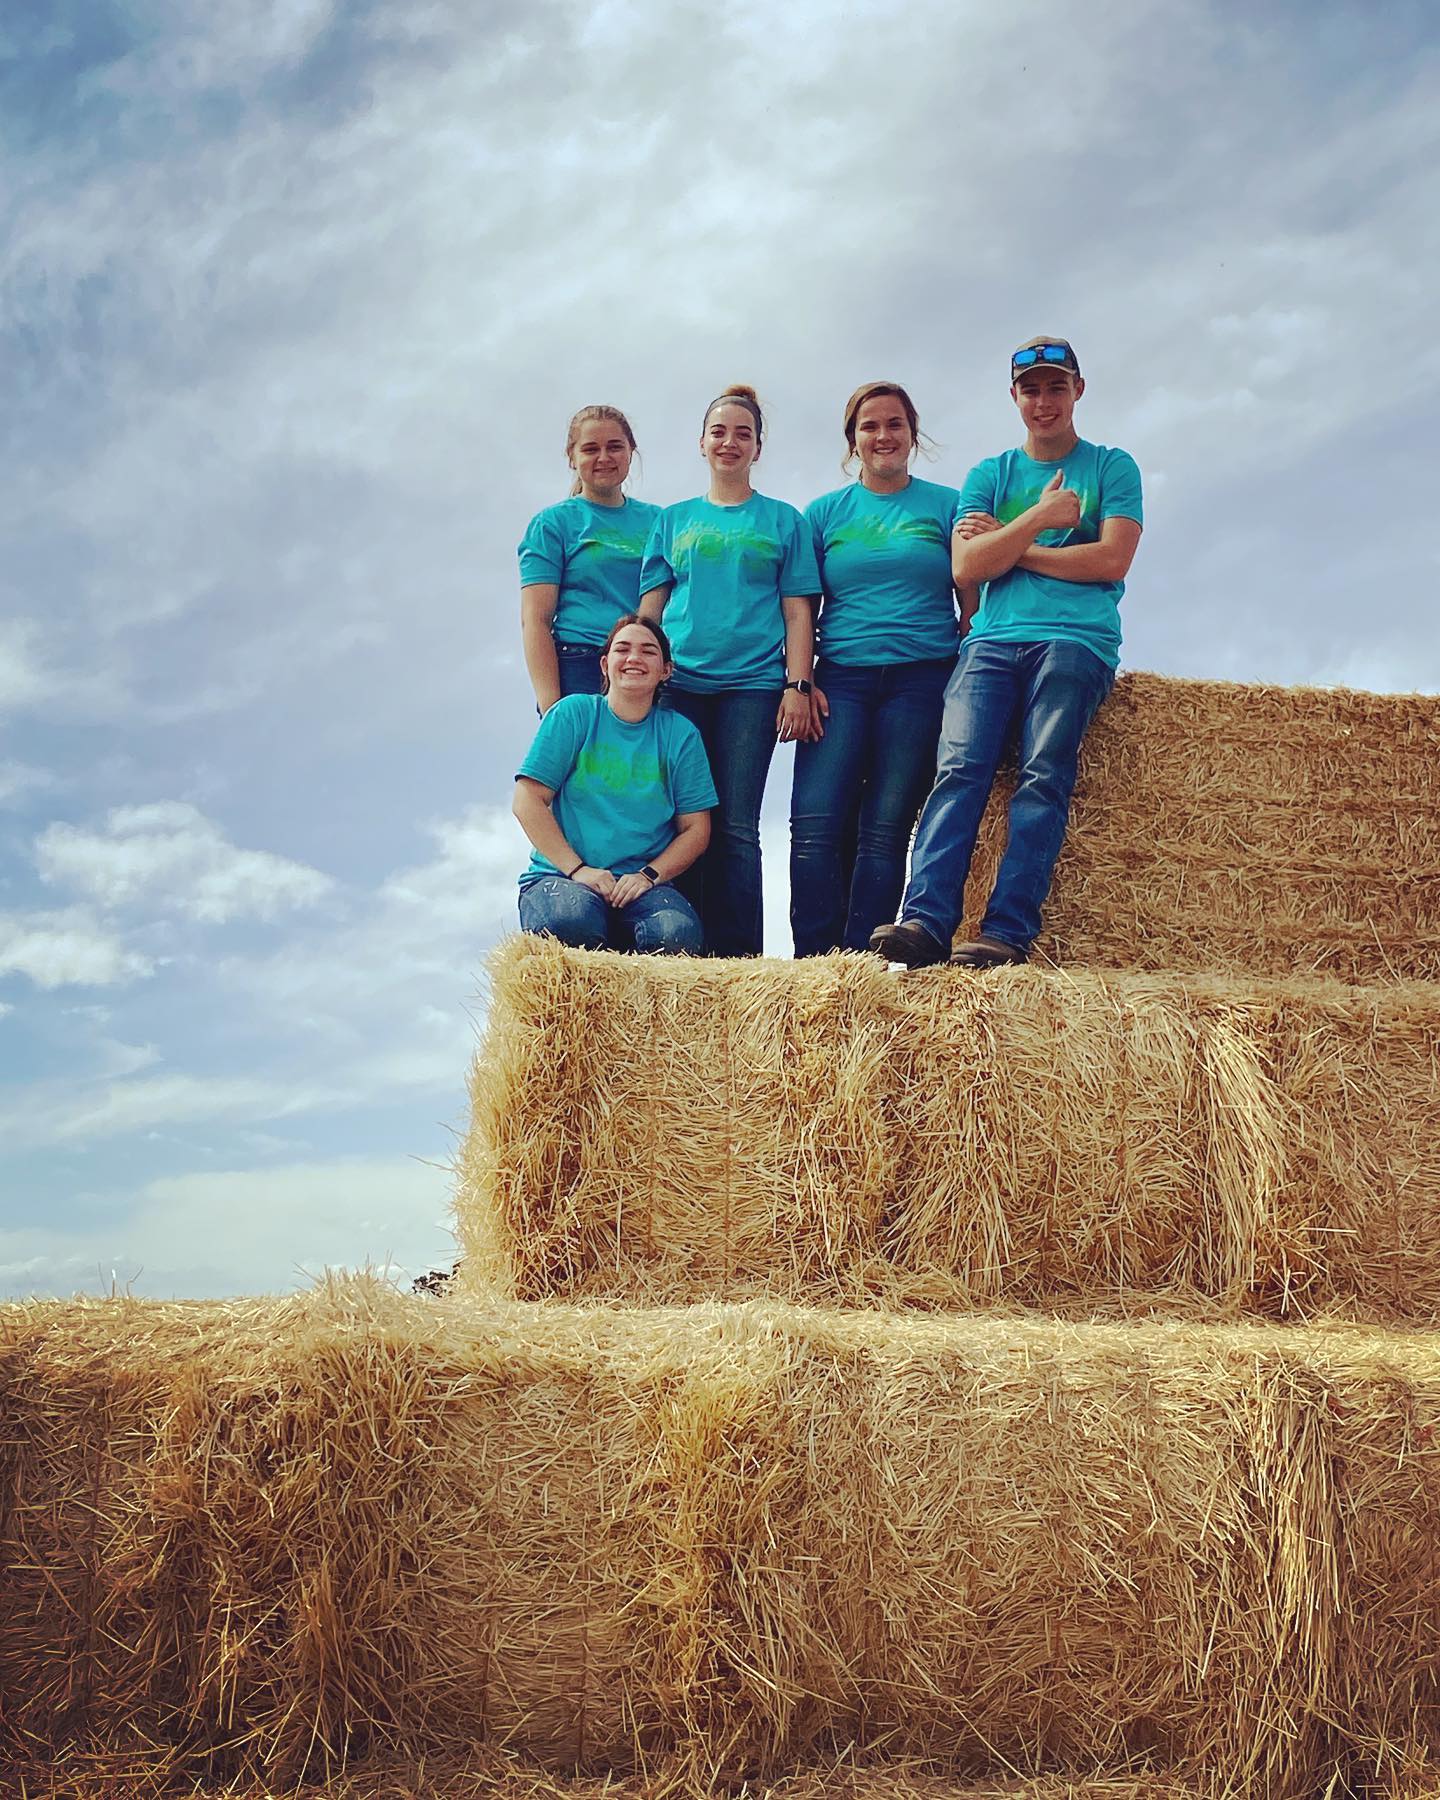 Alfred State agriculture students help at Livingston County Farm Fest (L to R): Hope Avedisian, Elyssa Desotelle (kneeling), Emma Dominic, Abby Beidel, and Tyler Norton.